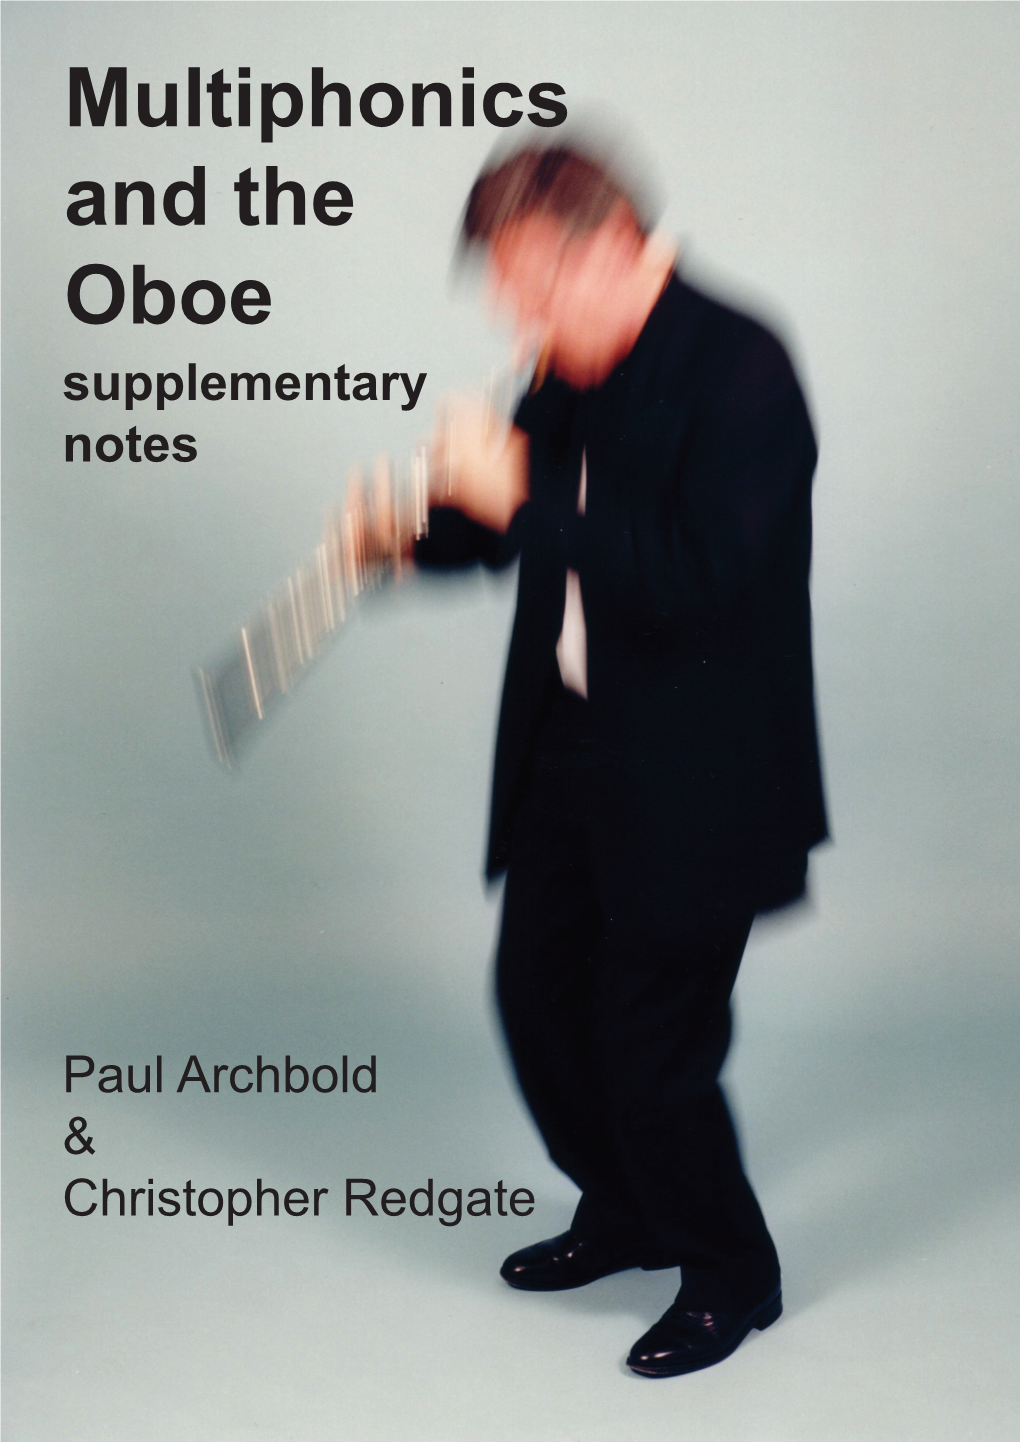 Multiphonics and the Oboe: Supplementary Notes